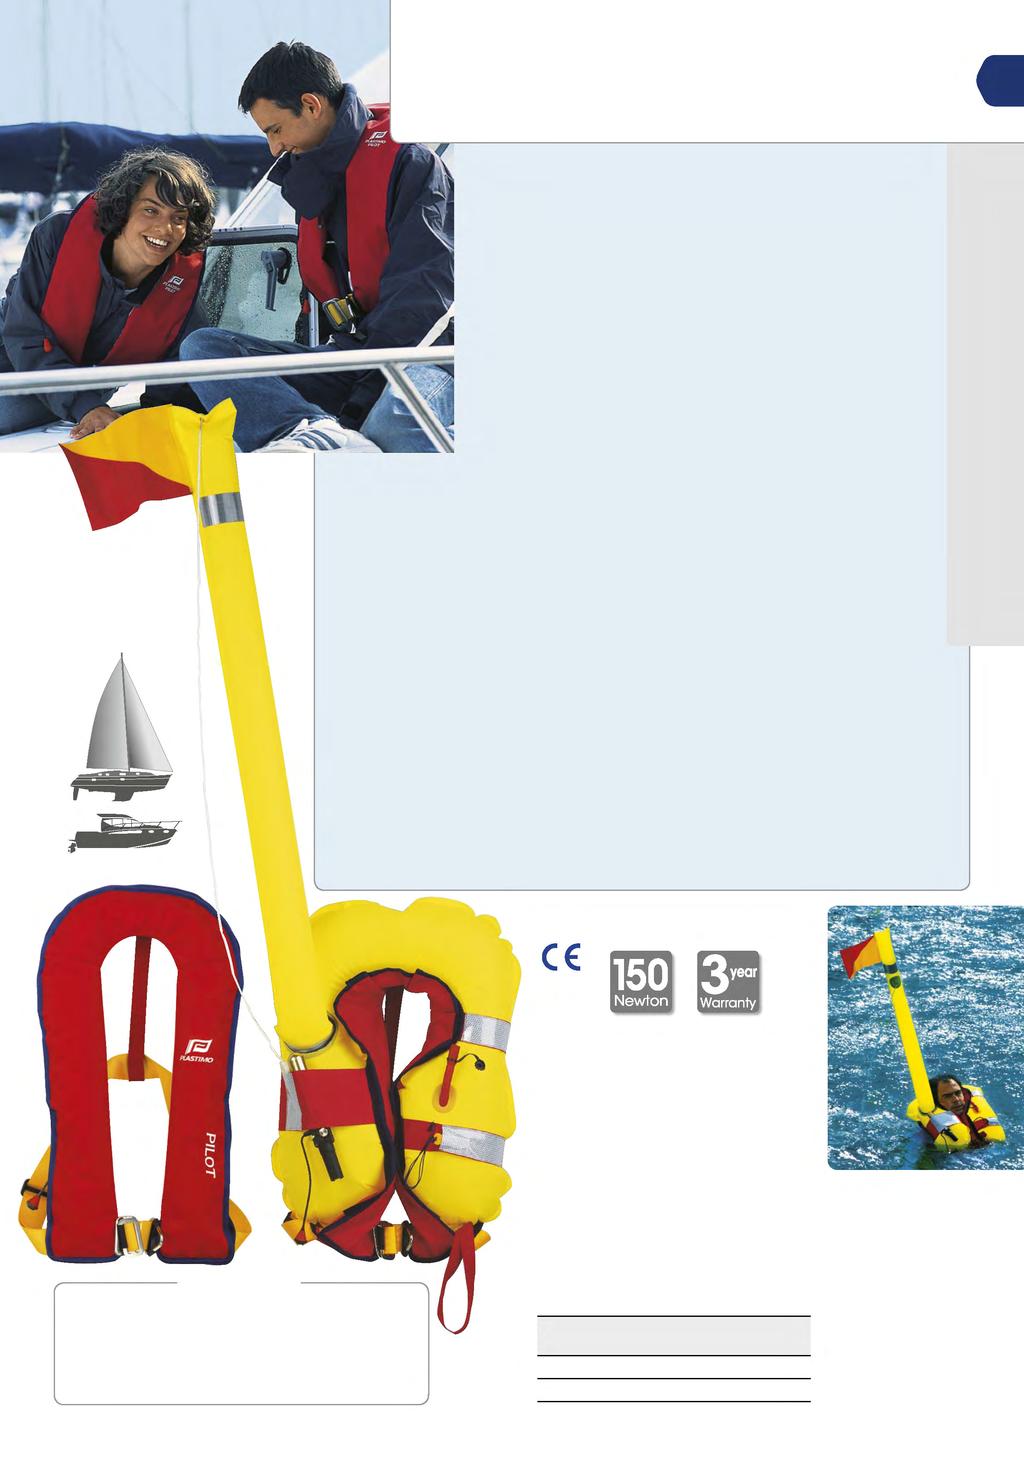 Inflatable lifejackets Manual or automatic inflation? Some hints to help you choose. Inflation can be triggered in 3 ways : possible on all lifejacket models.